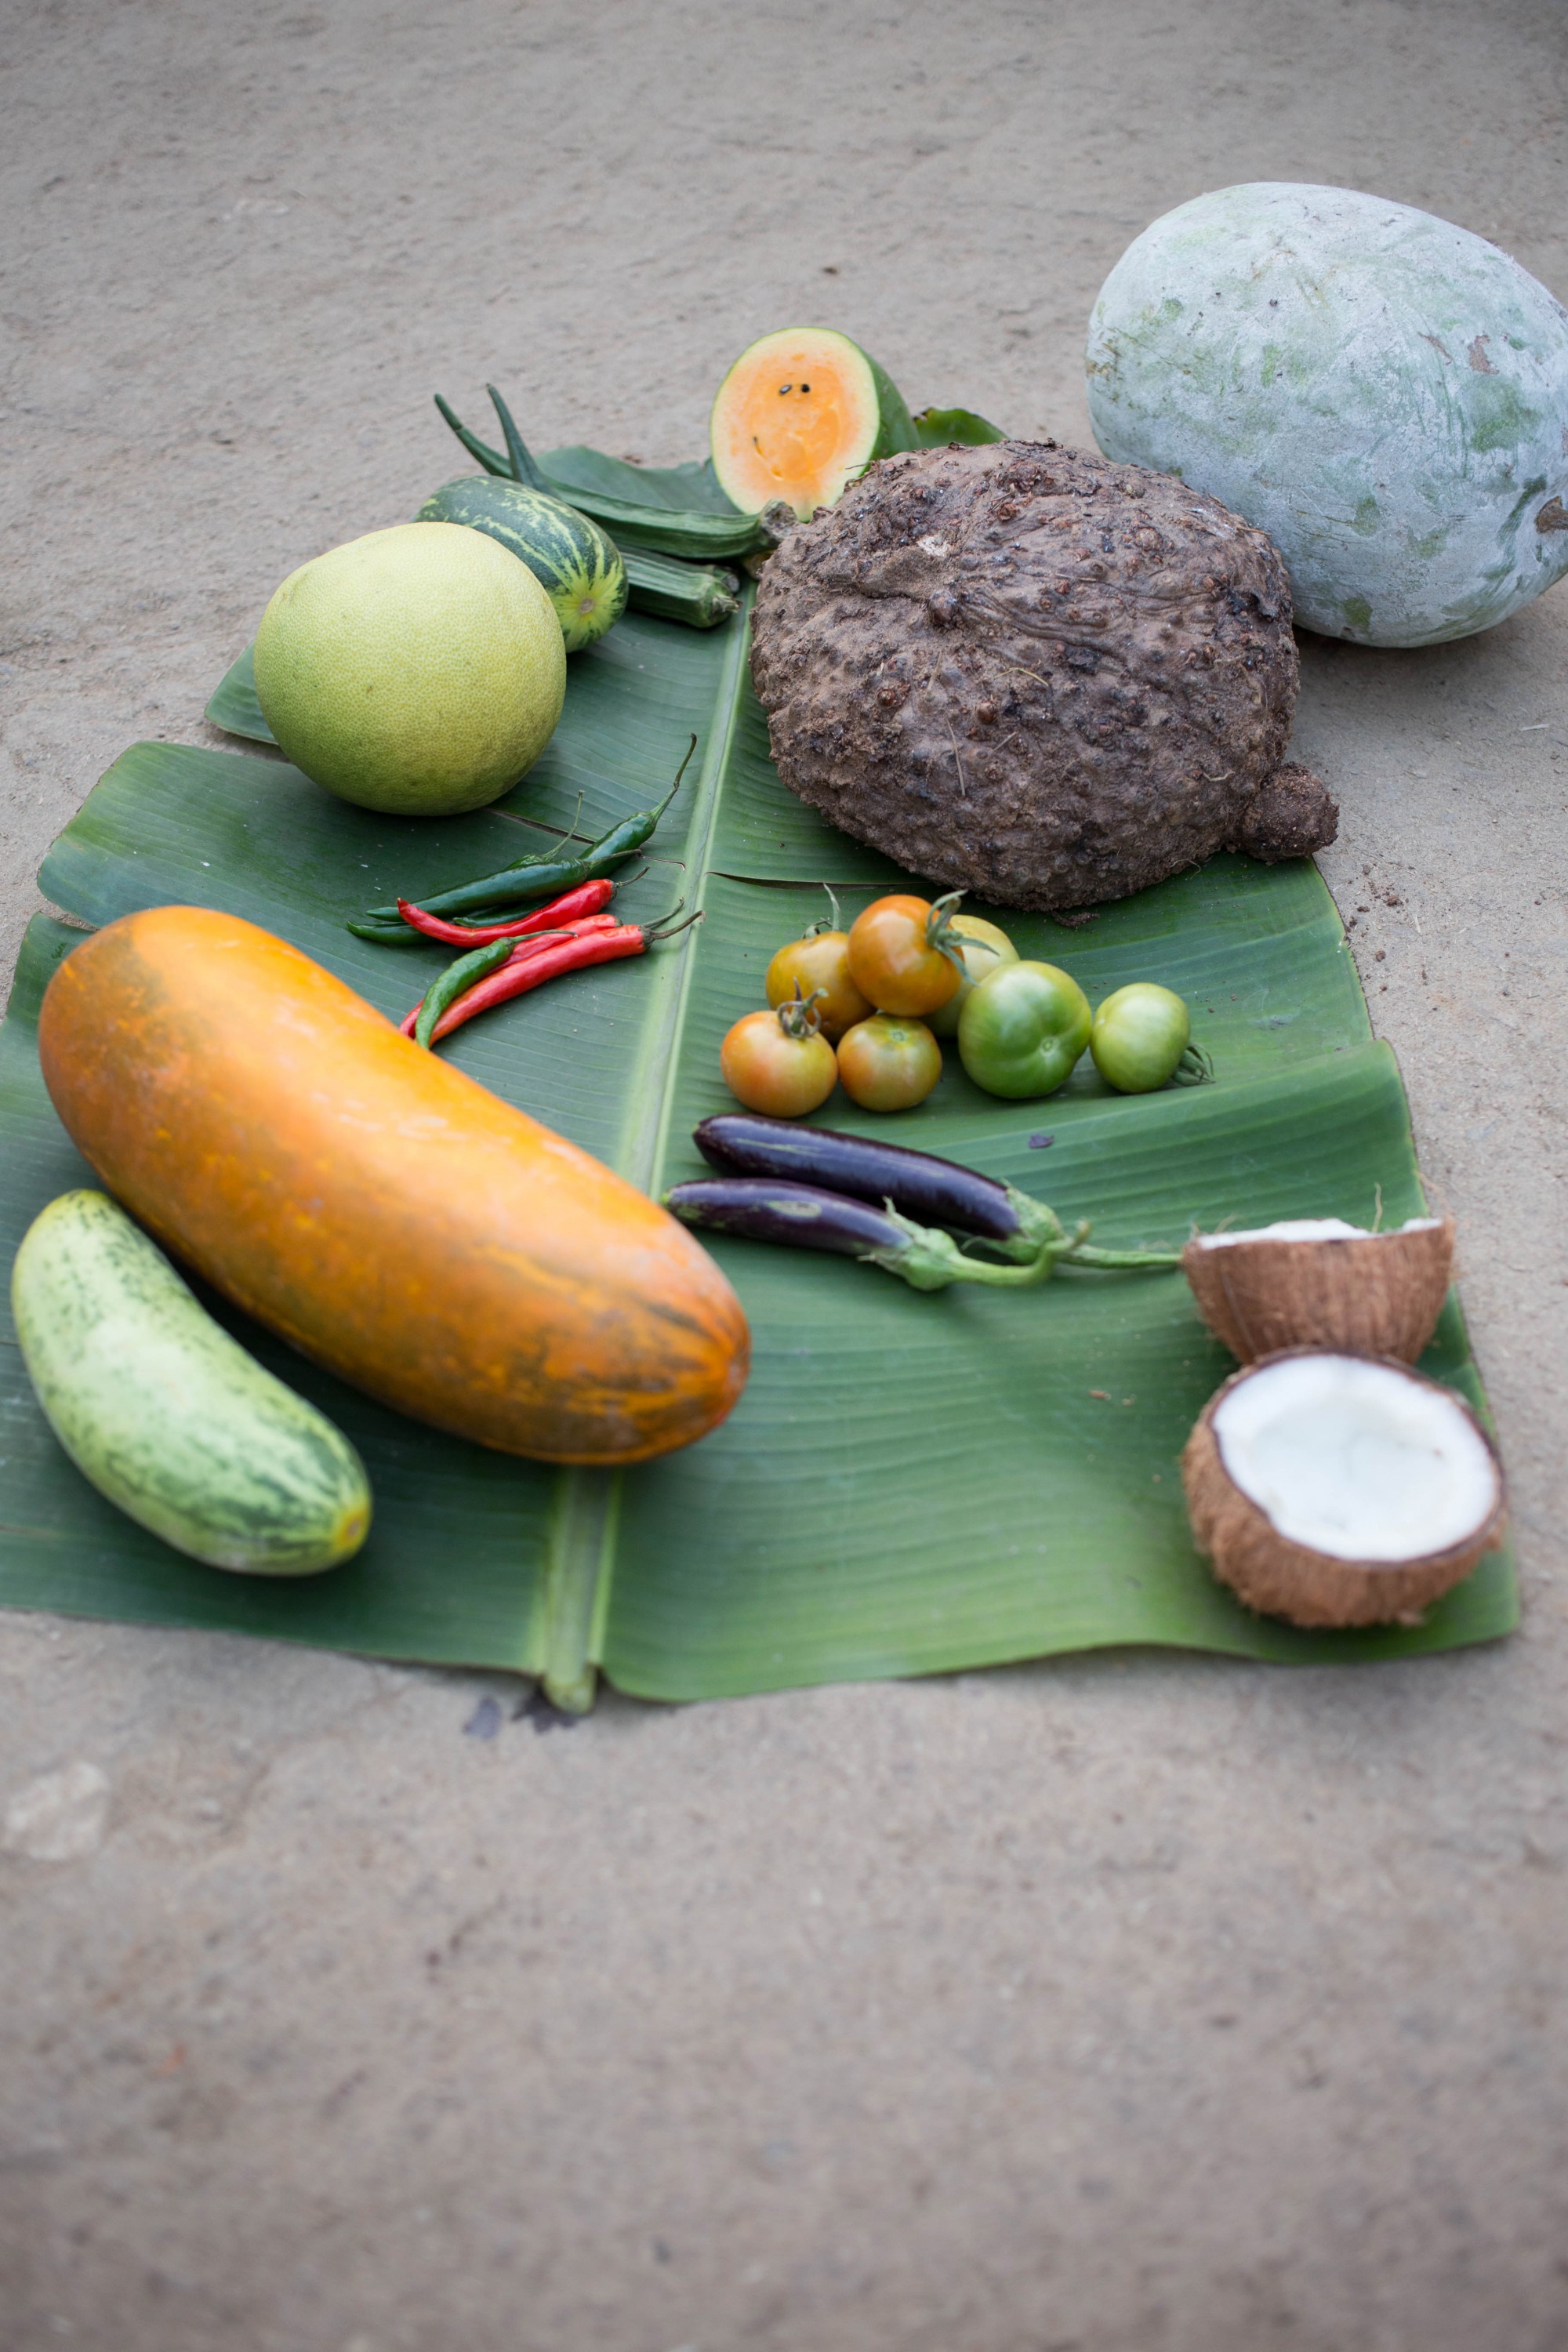 All the ingredients for Sumathi’s delicious sambar.